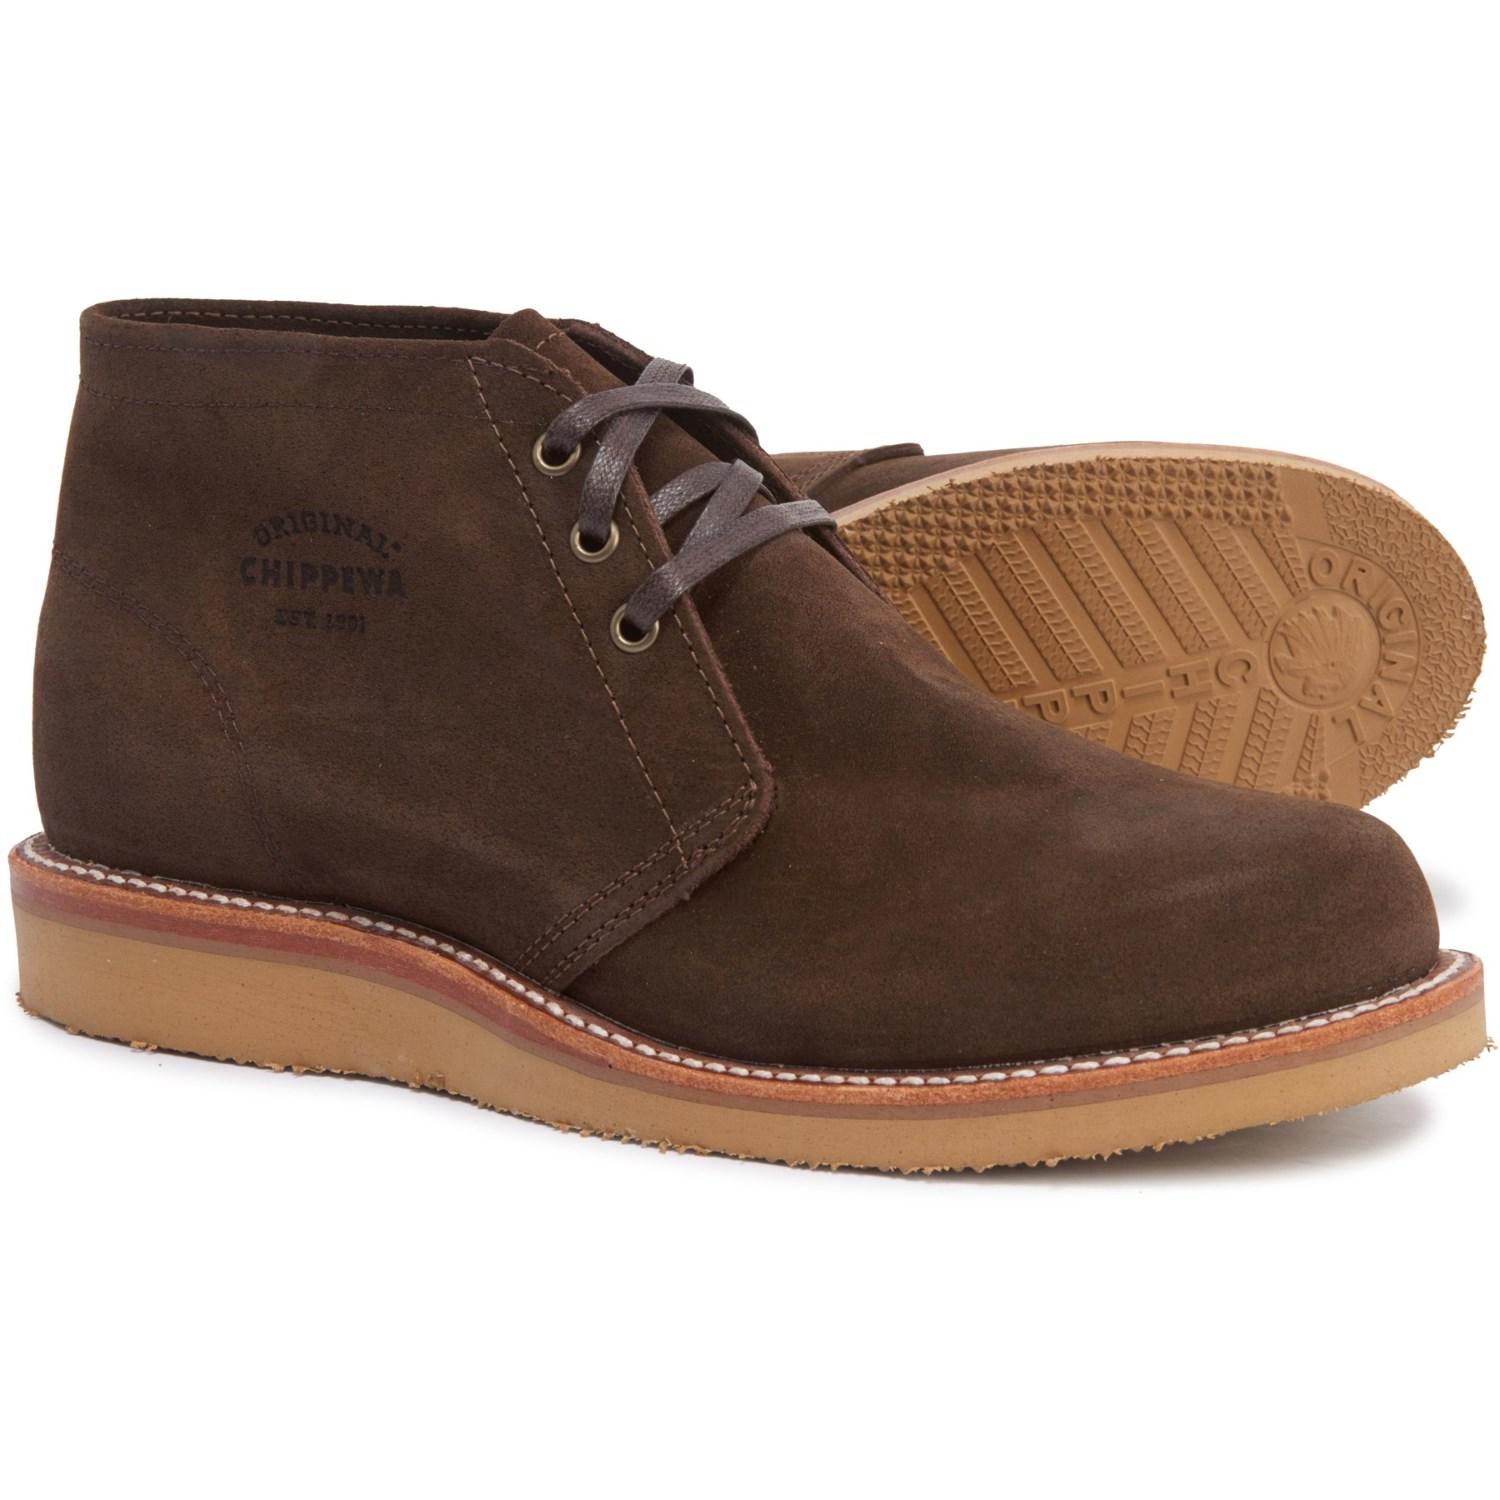 Chippewa Suede Milford Casual Chukka Boots in Chocolate Suede (Brown ...